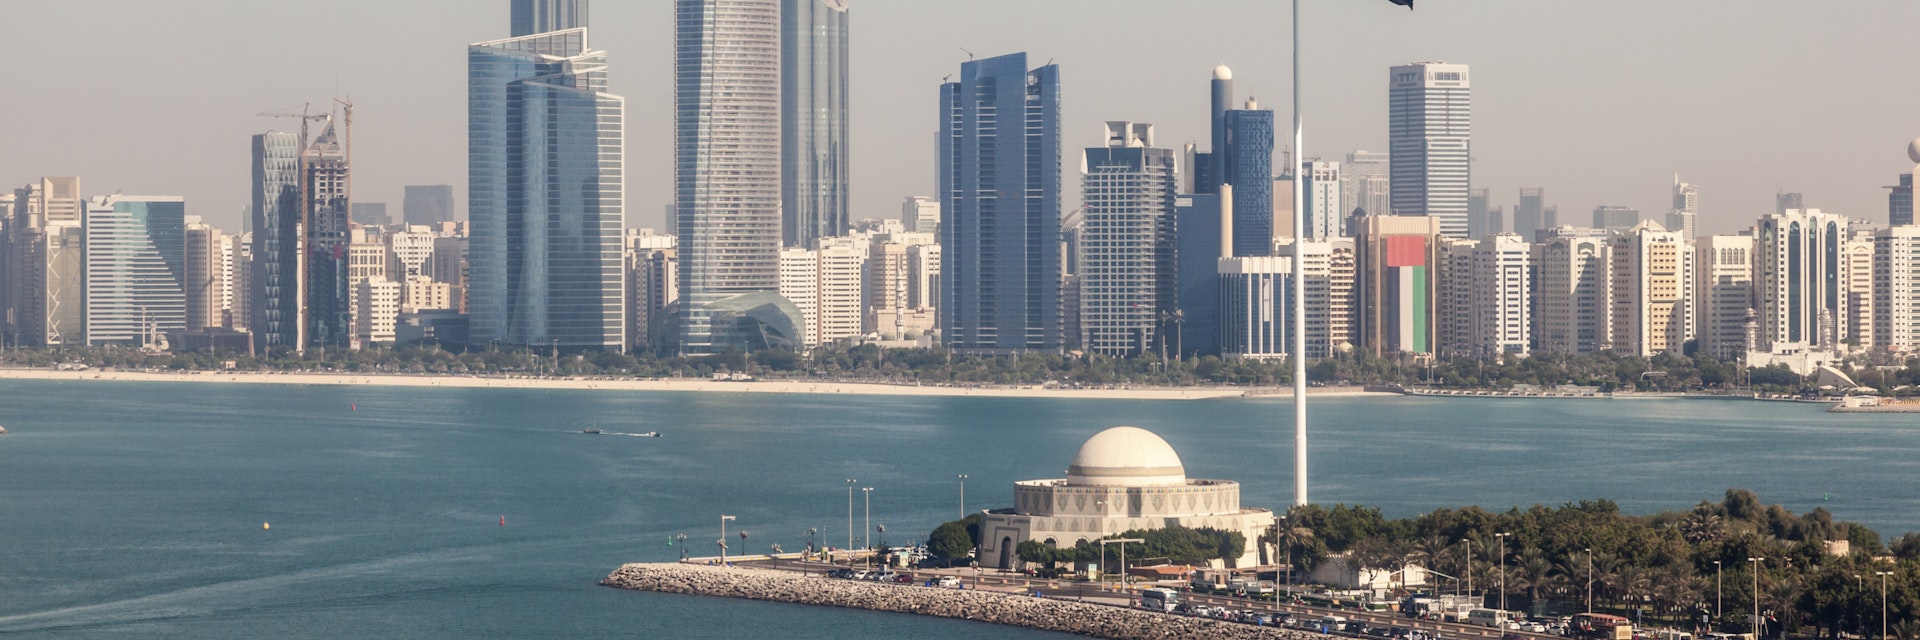 Elevated view of Abu Dhabi downtown skyline and corniche with the flag pole. United Arab Emirates, Middle East